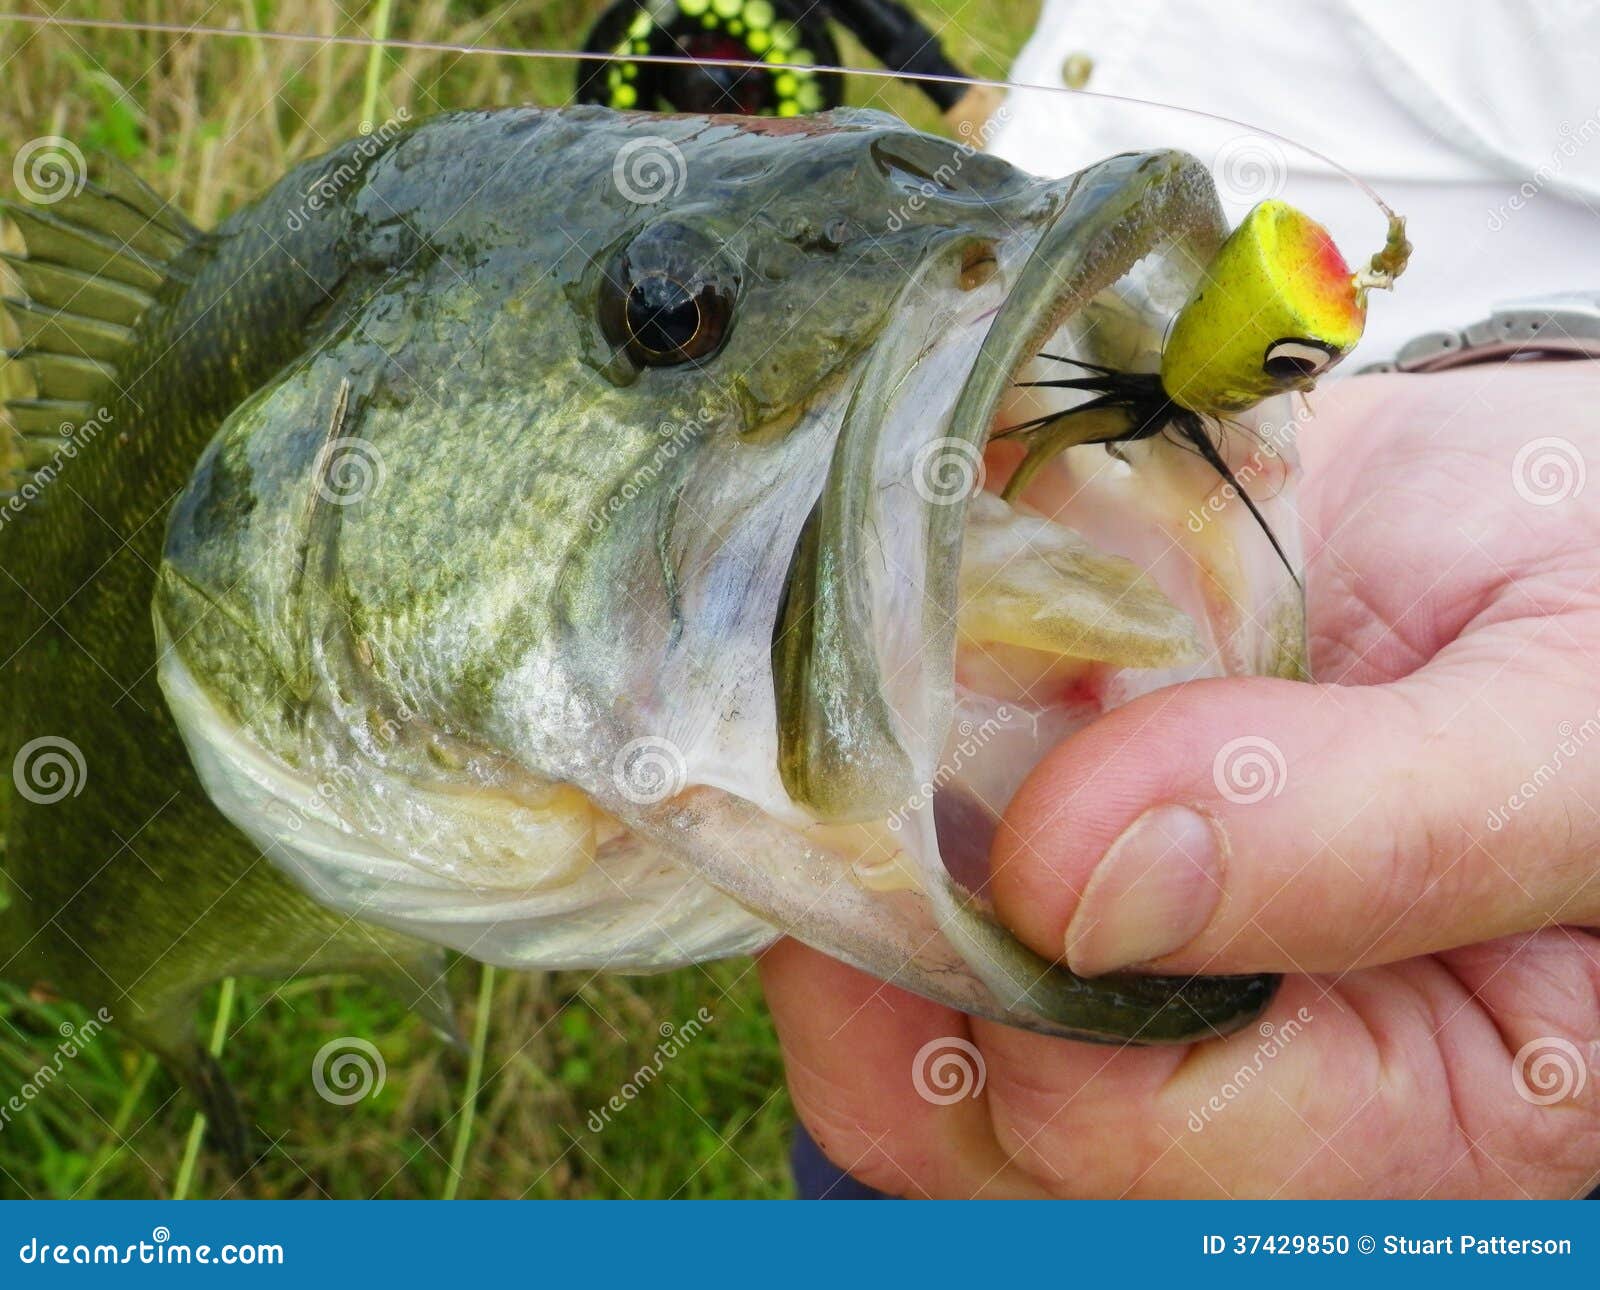 bass caught on fly